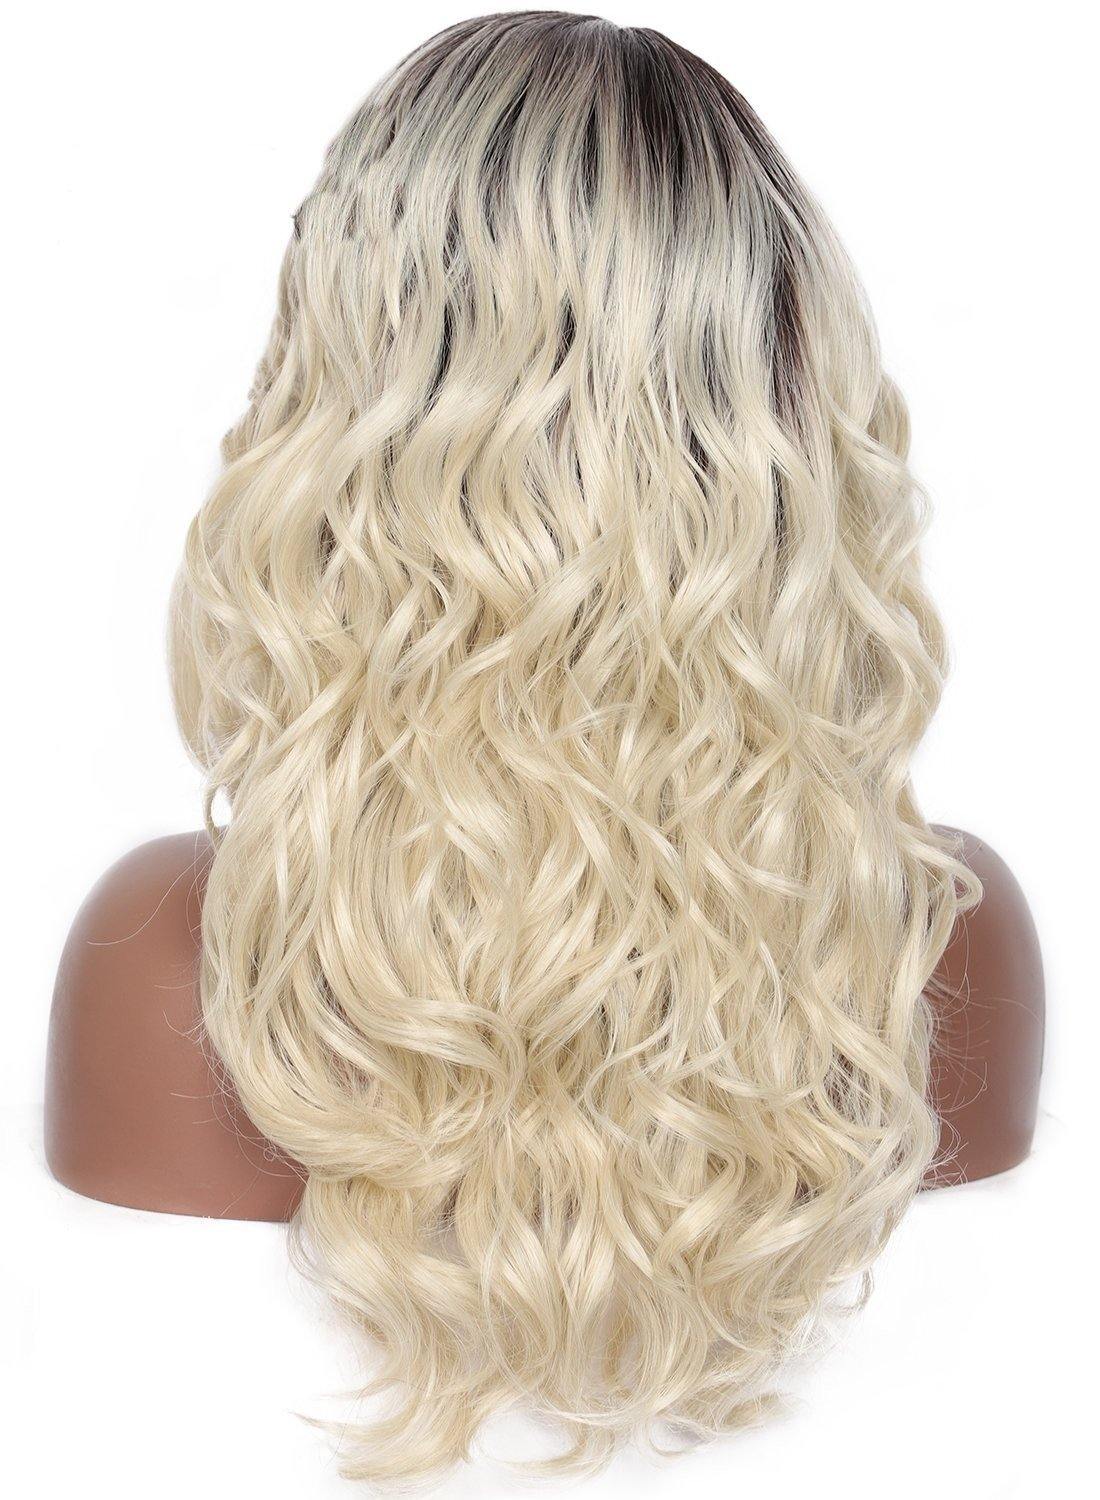 Perruque Lace Front Blonde | Perruque-Club